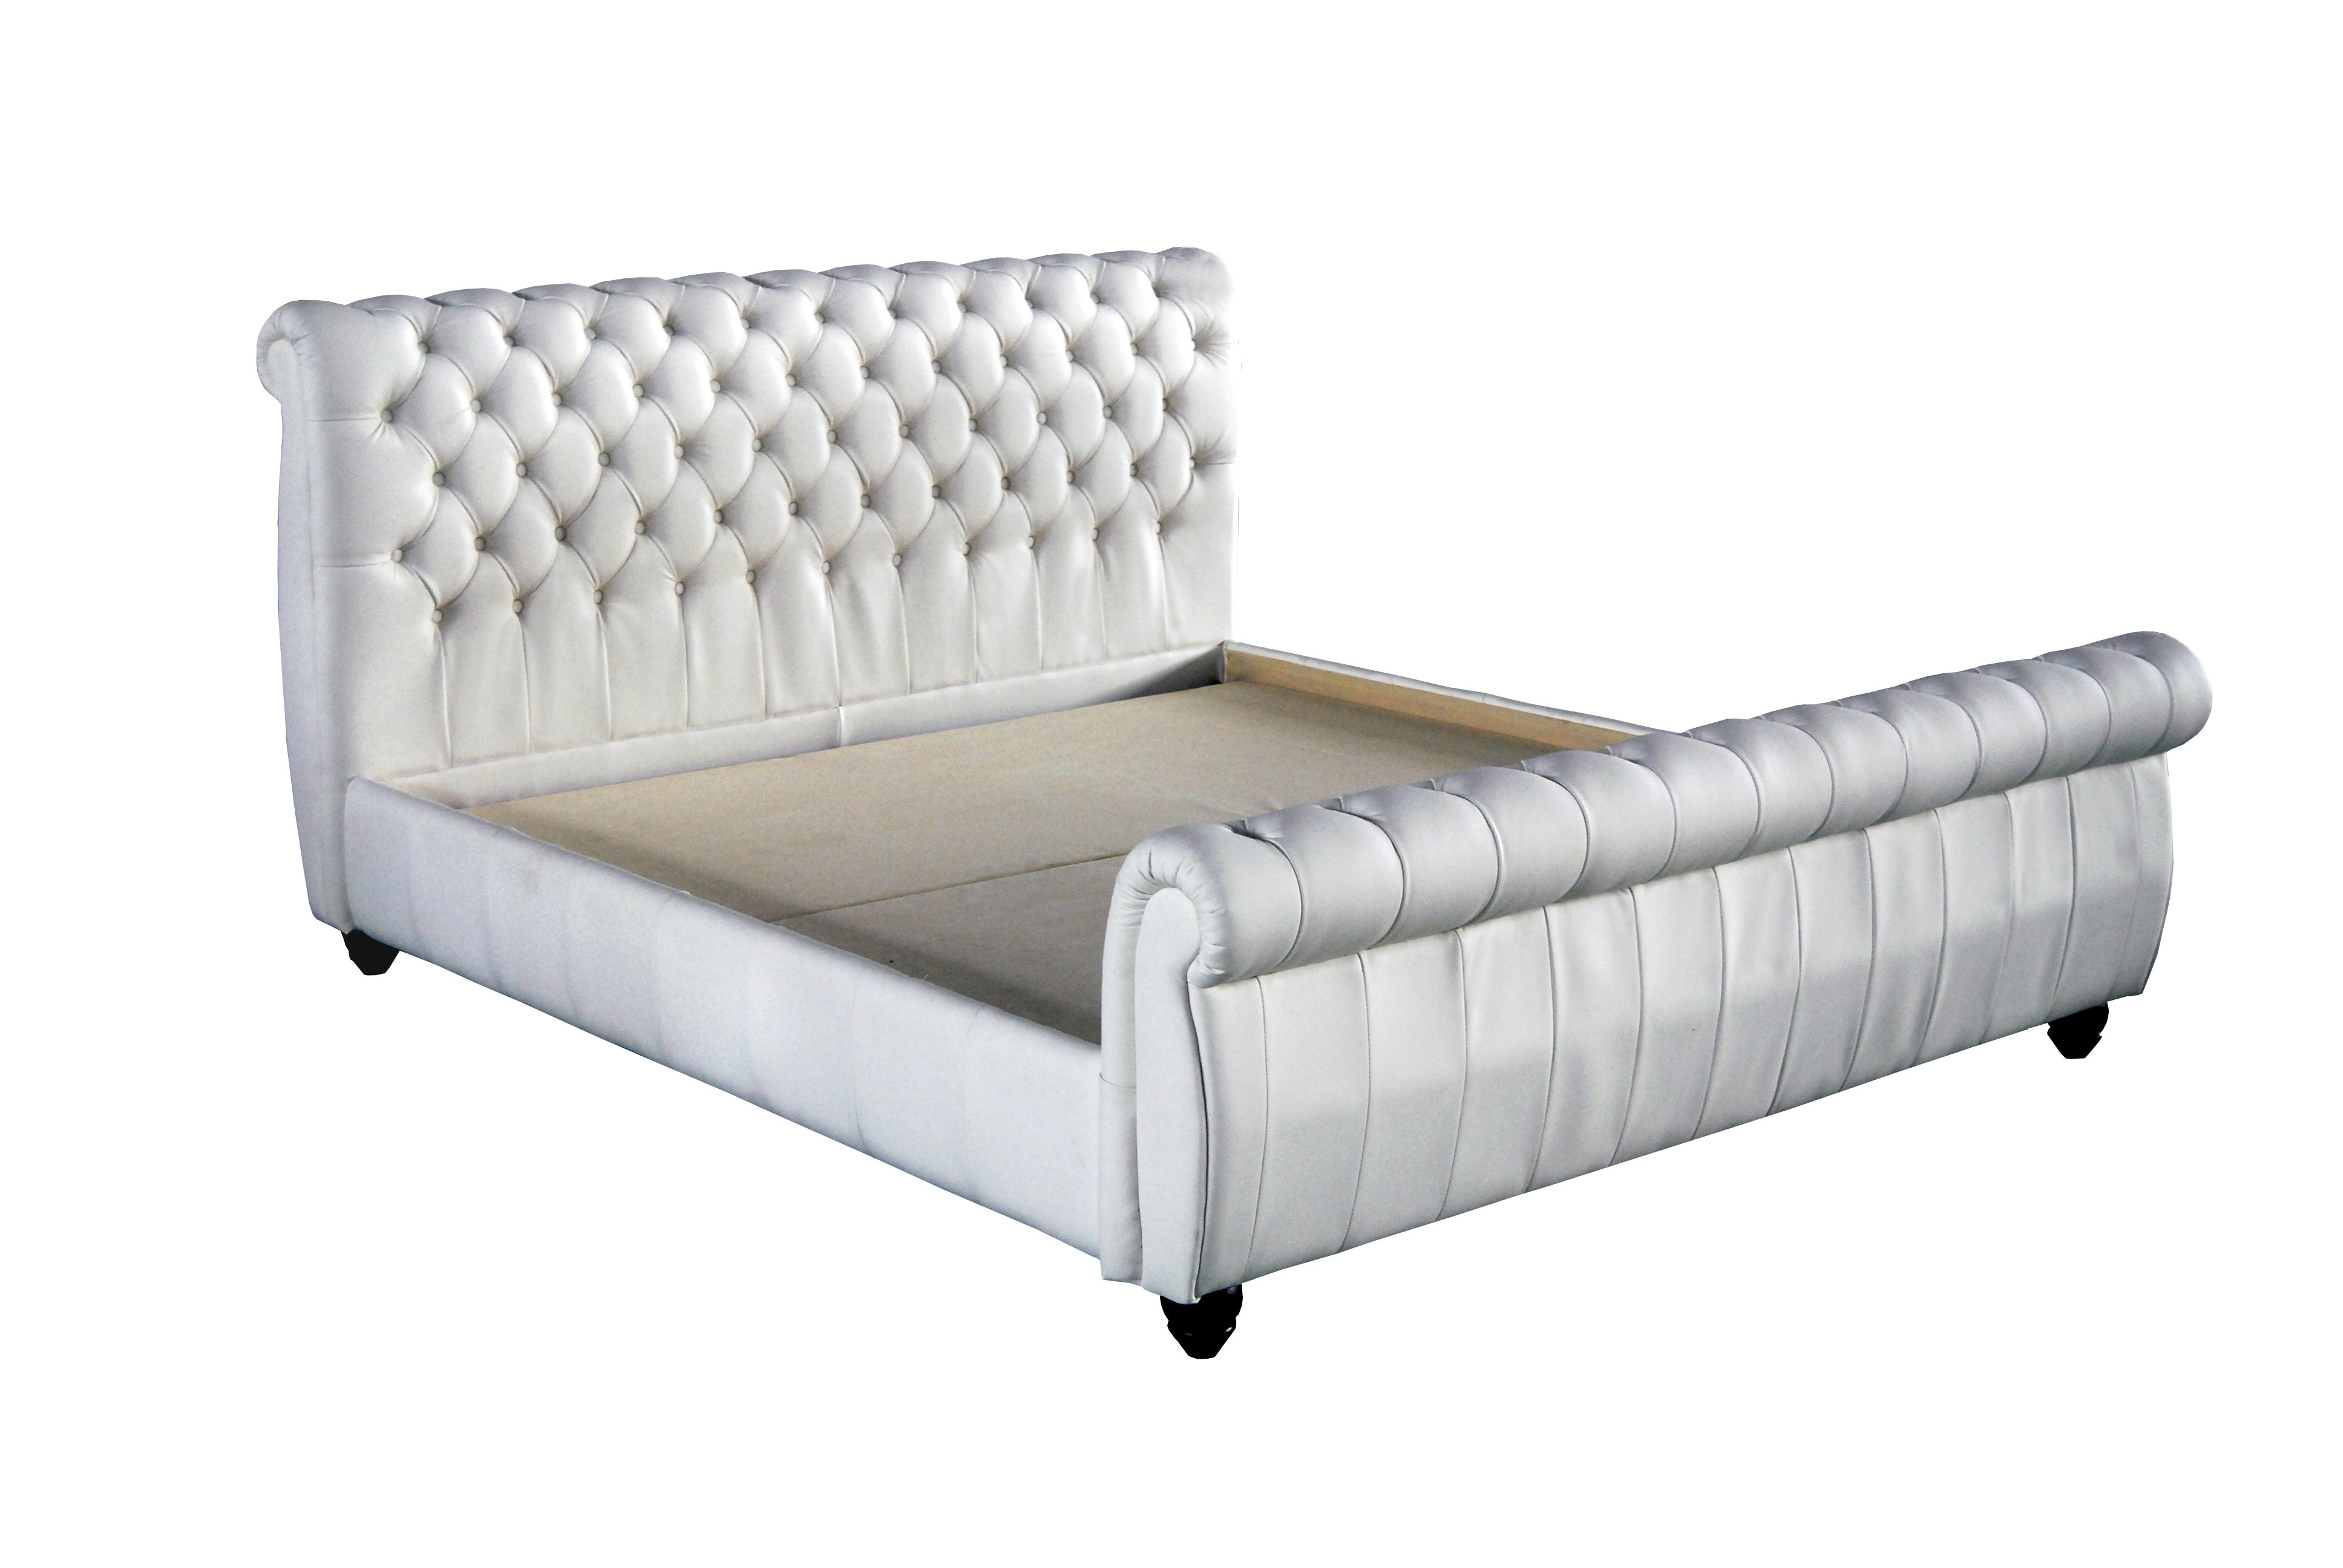 Chesterfield High Footboard Bed